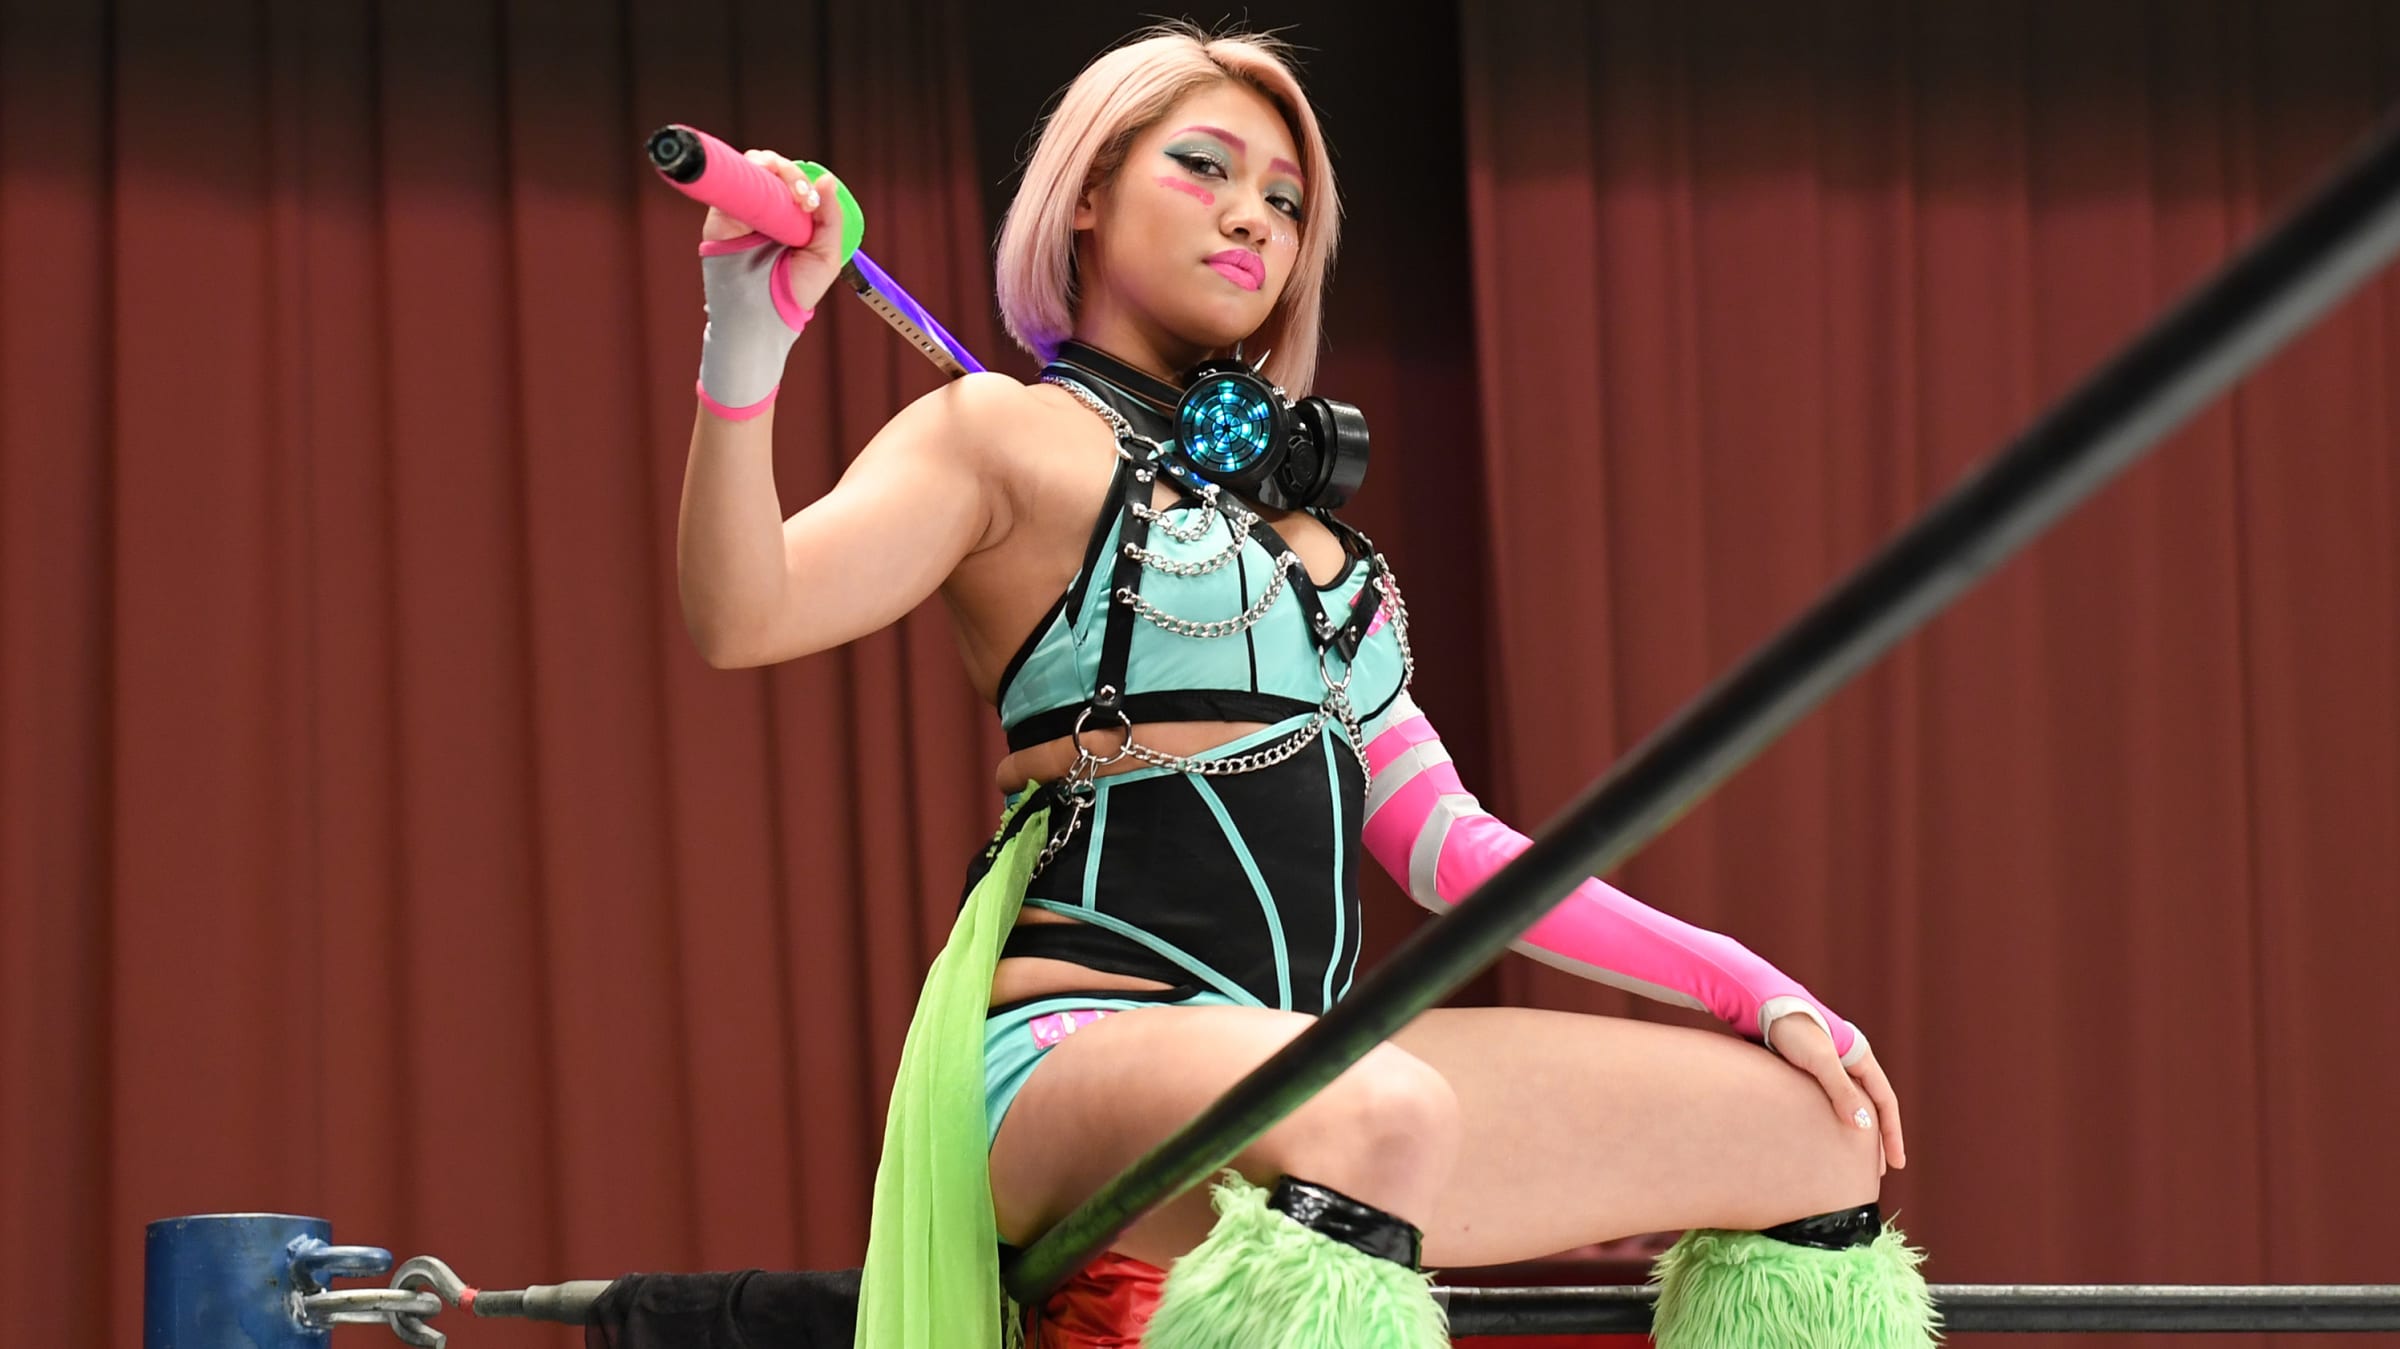 2400px x 1349px - Japanese Wrestler Hana Kimura Wouldn't Bow to Men, But Trolls Took Her Down